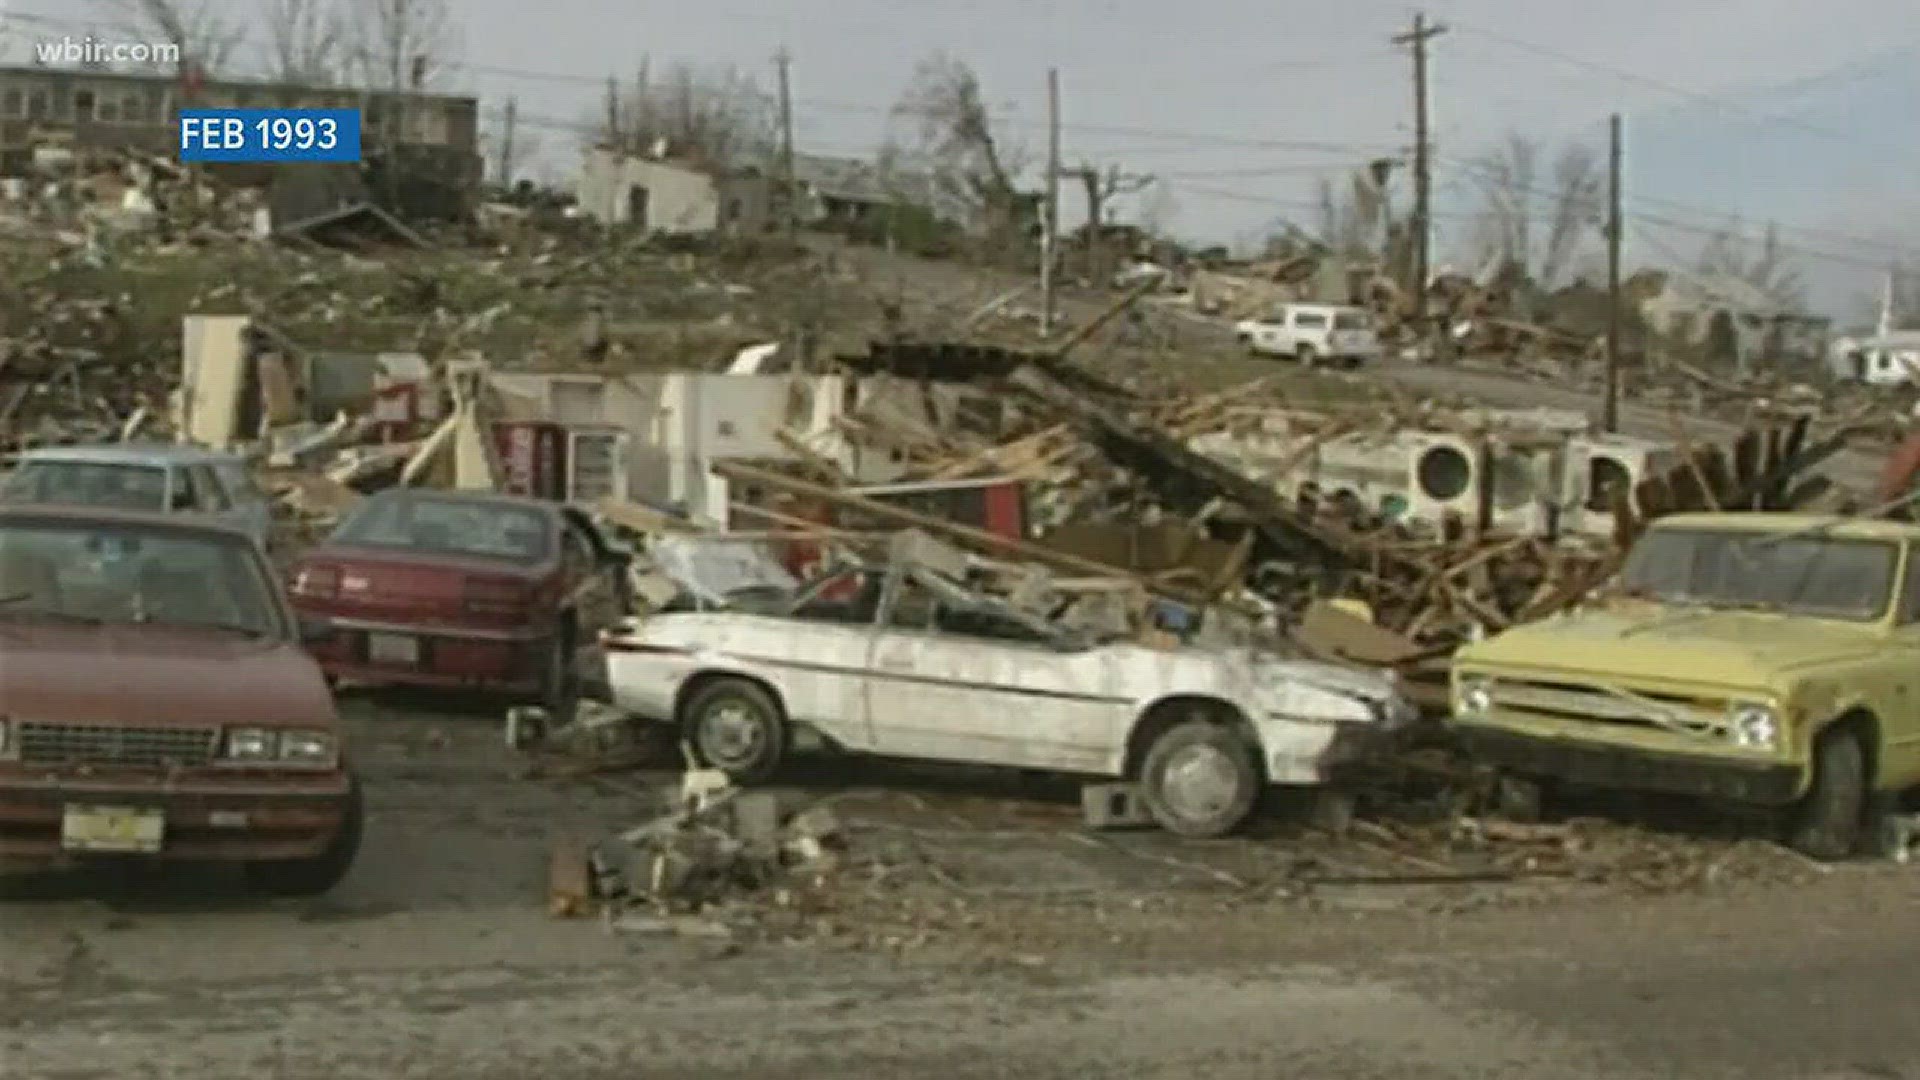 Feb. 21, 2018: 25 years ago on a sunny and warm day, devastation hit Lenoir City. People reflect on the damage the tornado struck in the town.